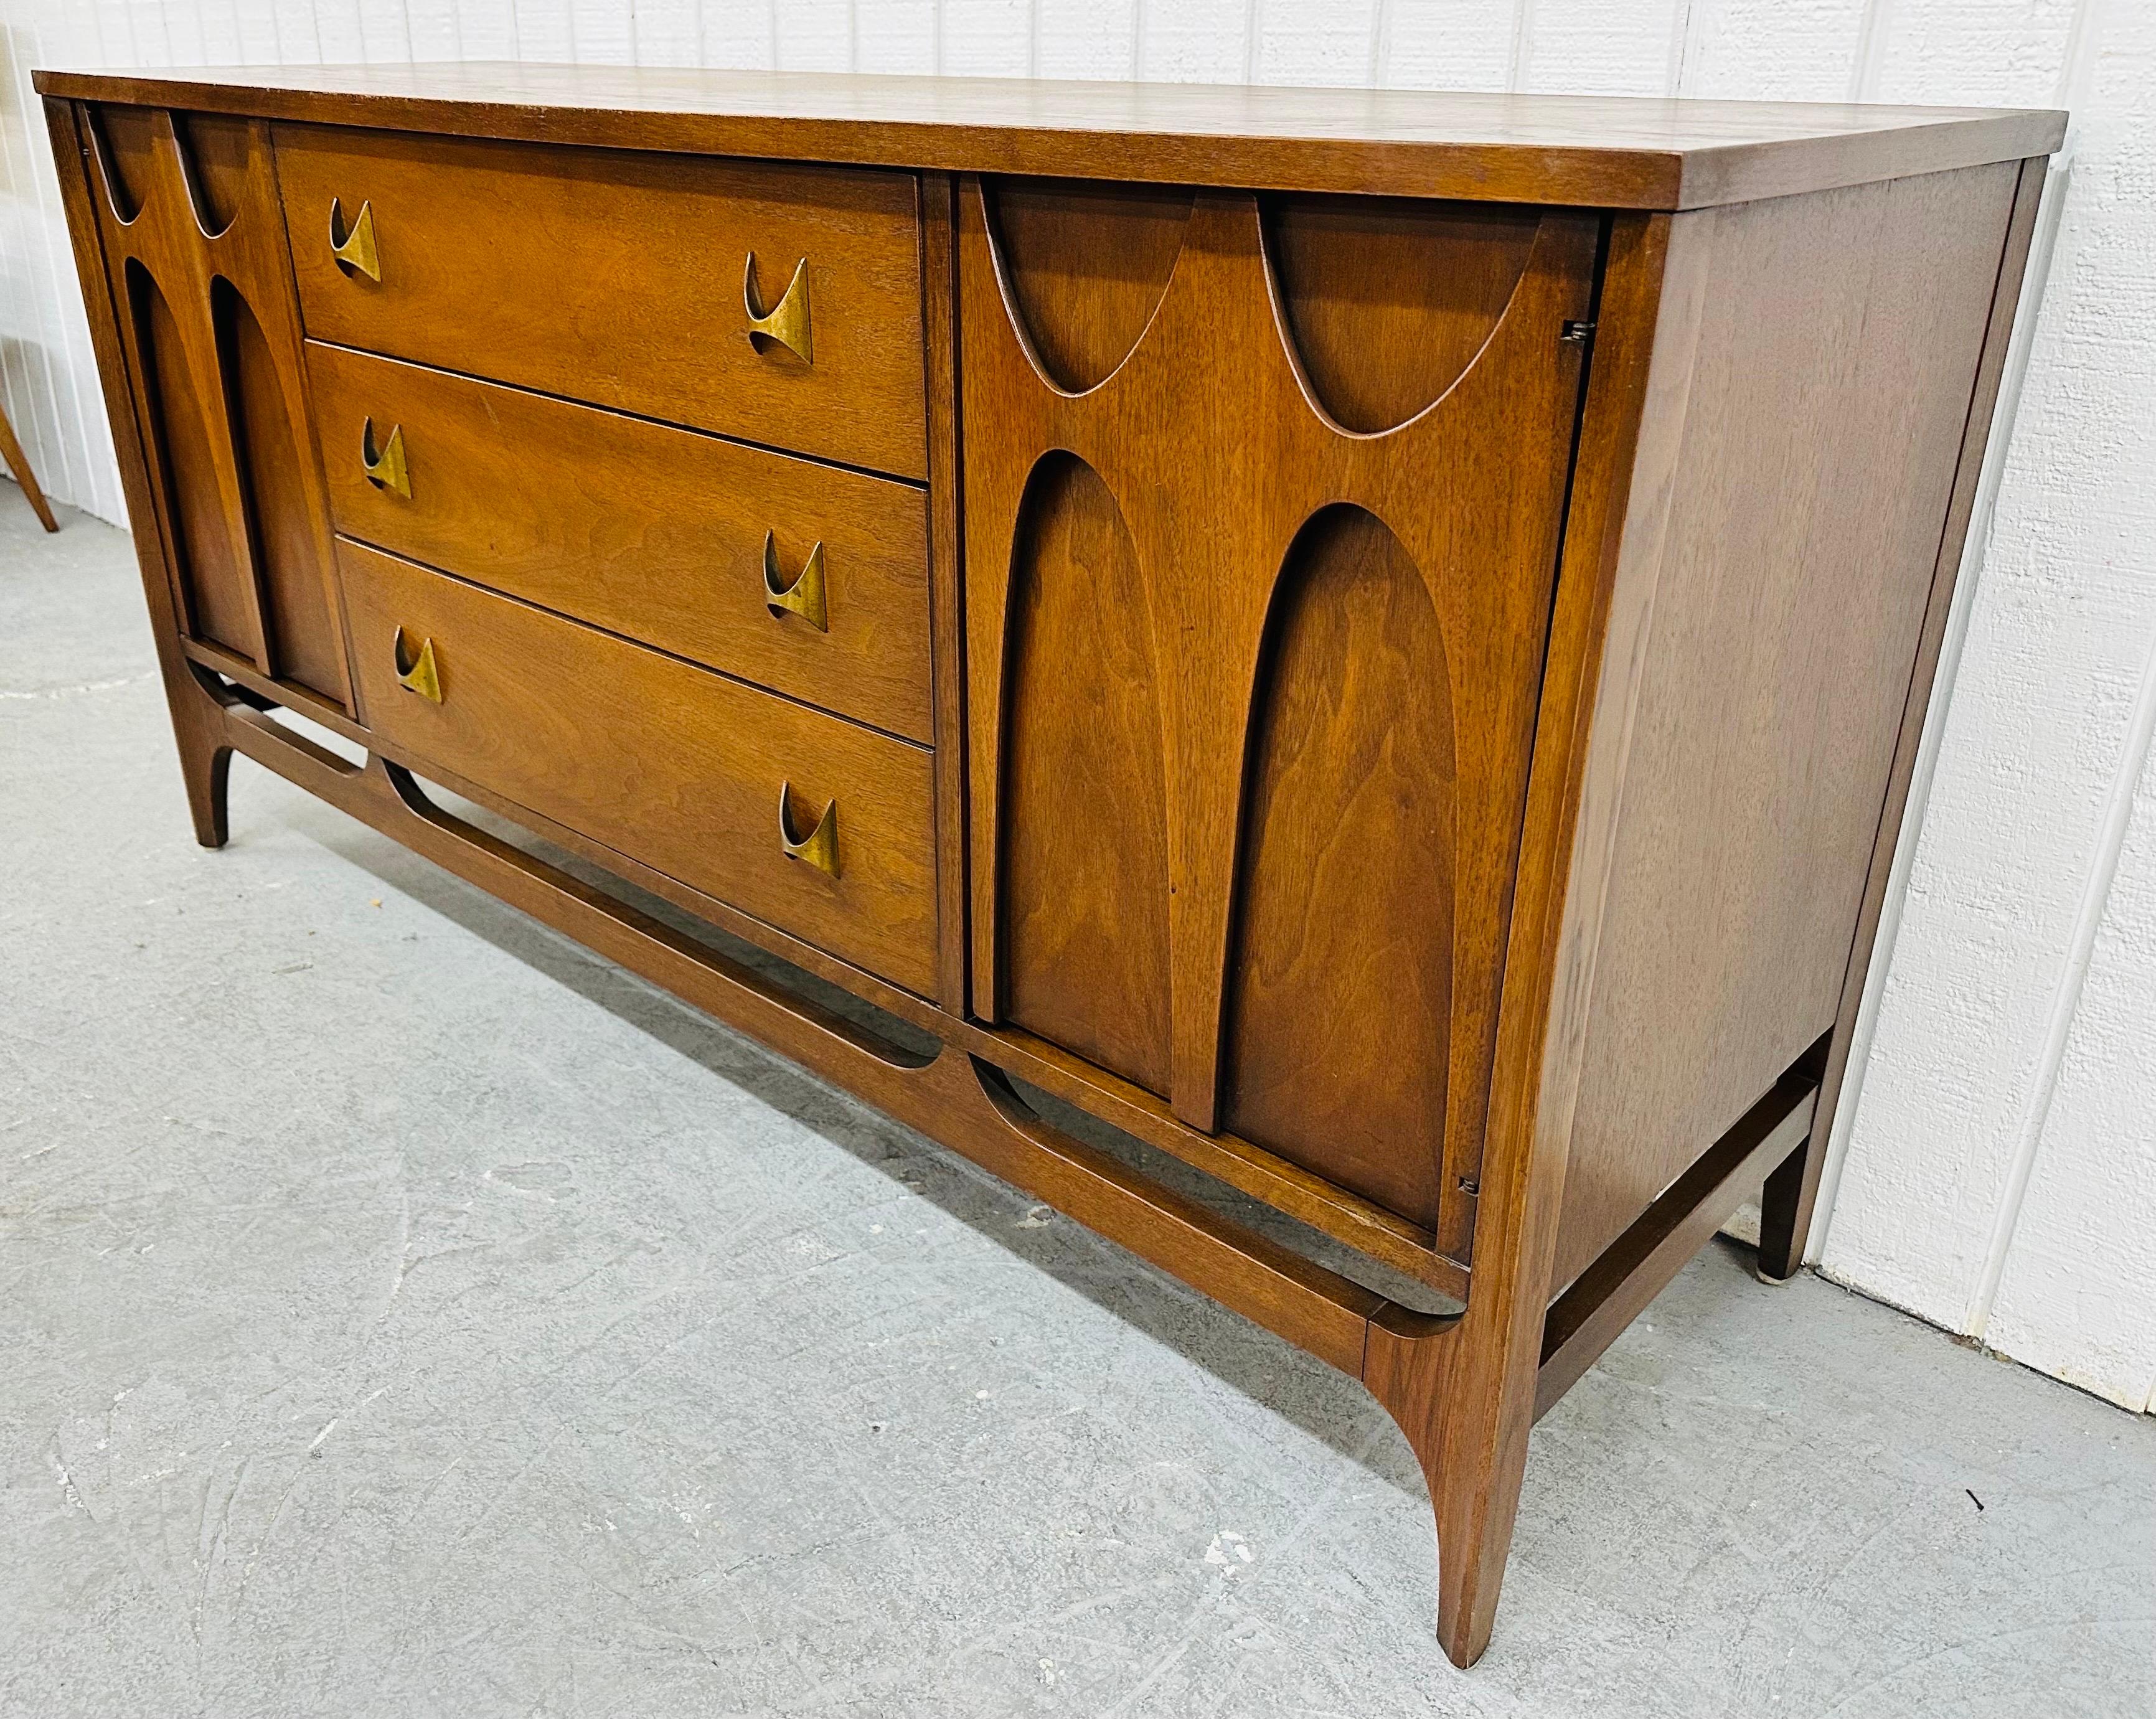 This listing is for a Mid-Century Modern Broyhill Brasilia Walnut Sideboard. Featuring a straight line design, sculpted doors on each side that open up to storage space, three drawers in the center, original brass Brasilia pulls, modern legs with